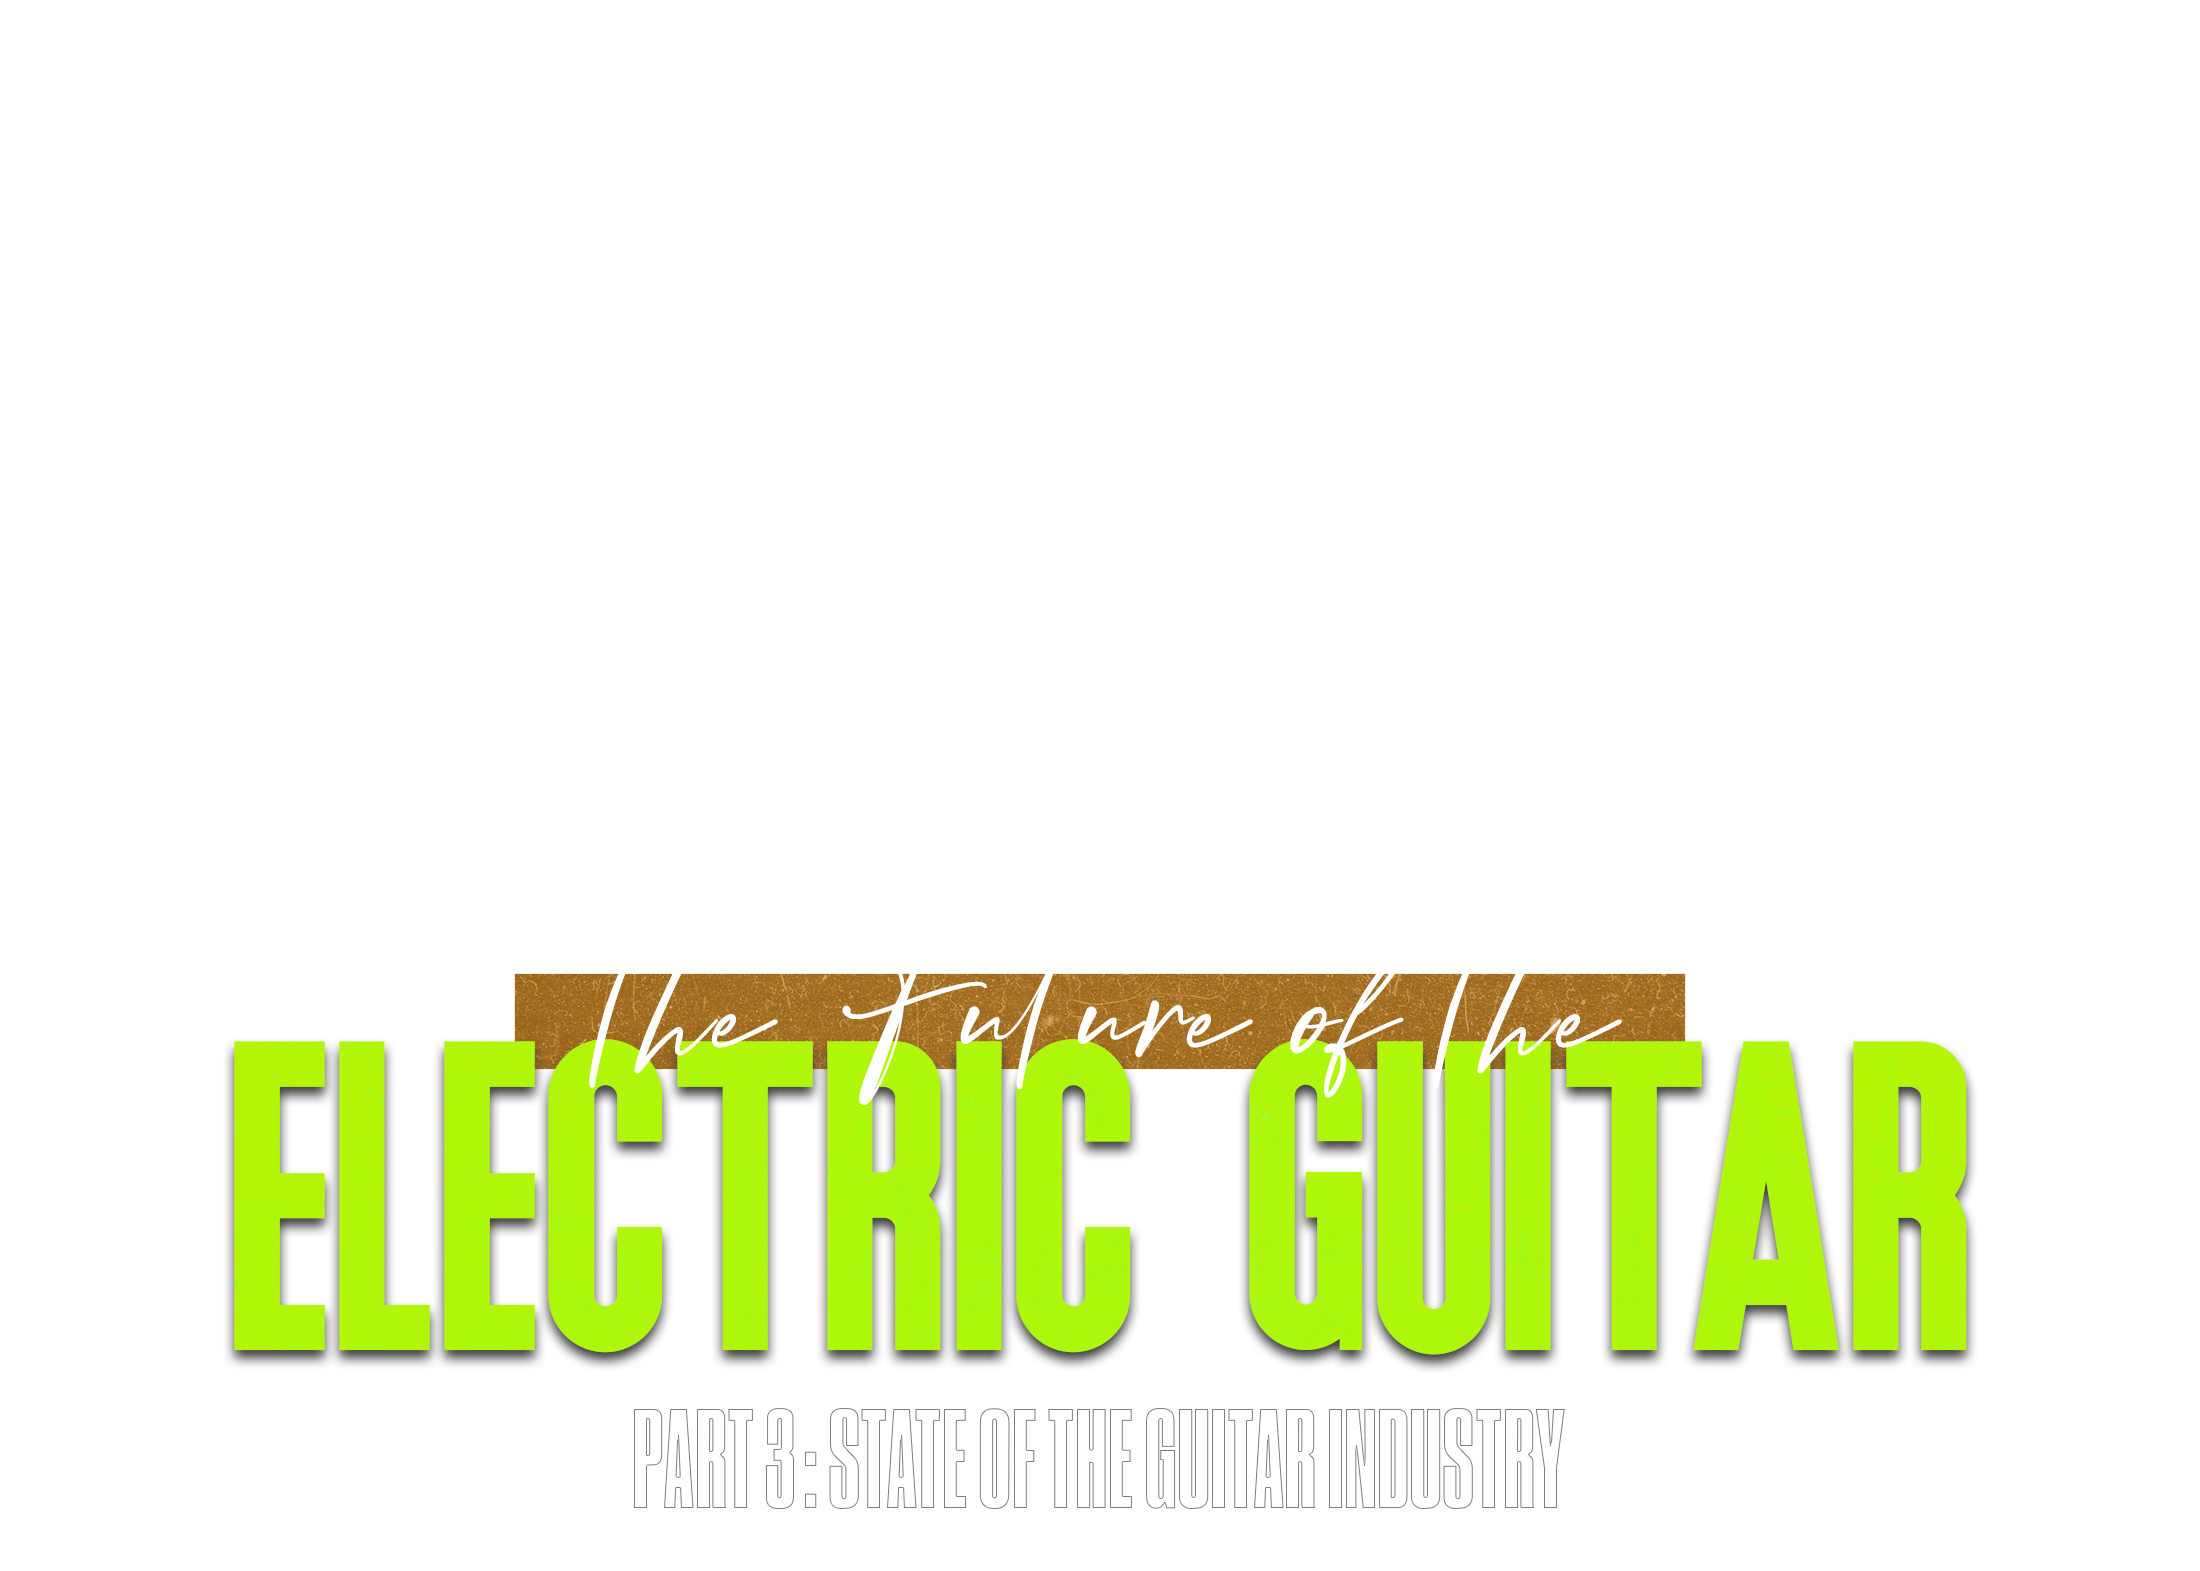 Part 3: State of the Guitar Industry